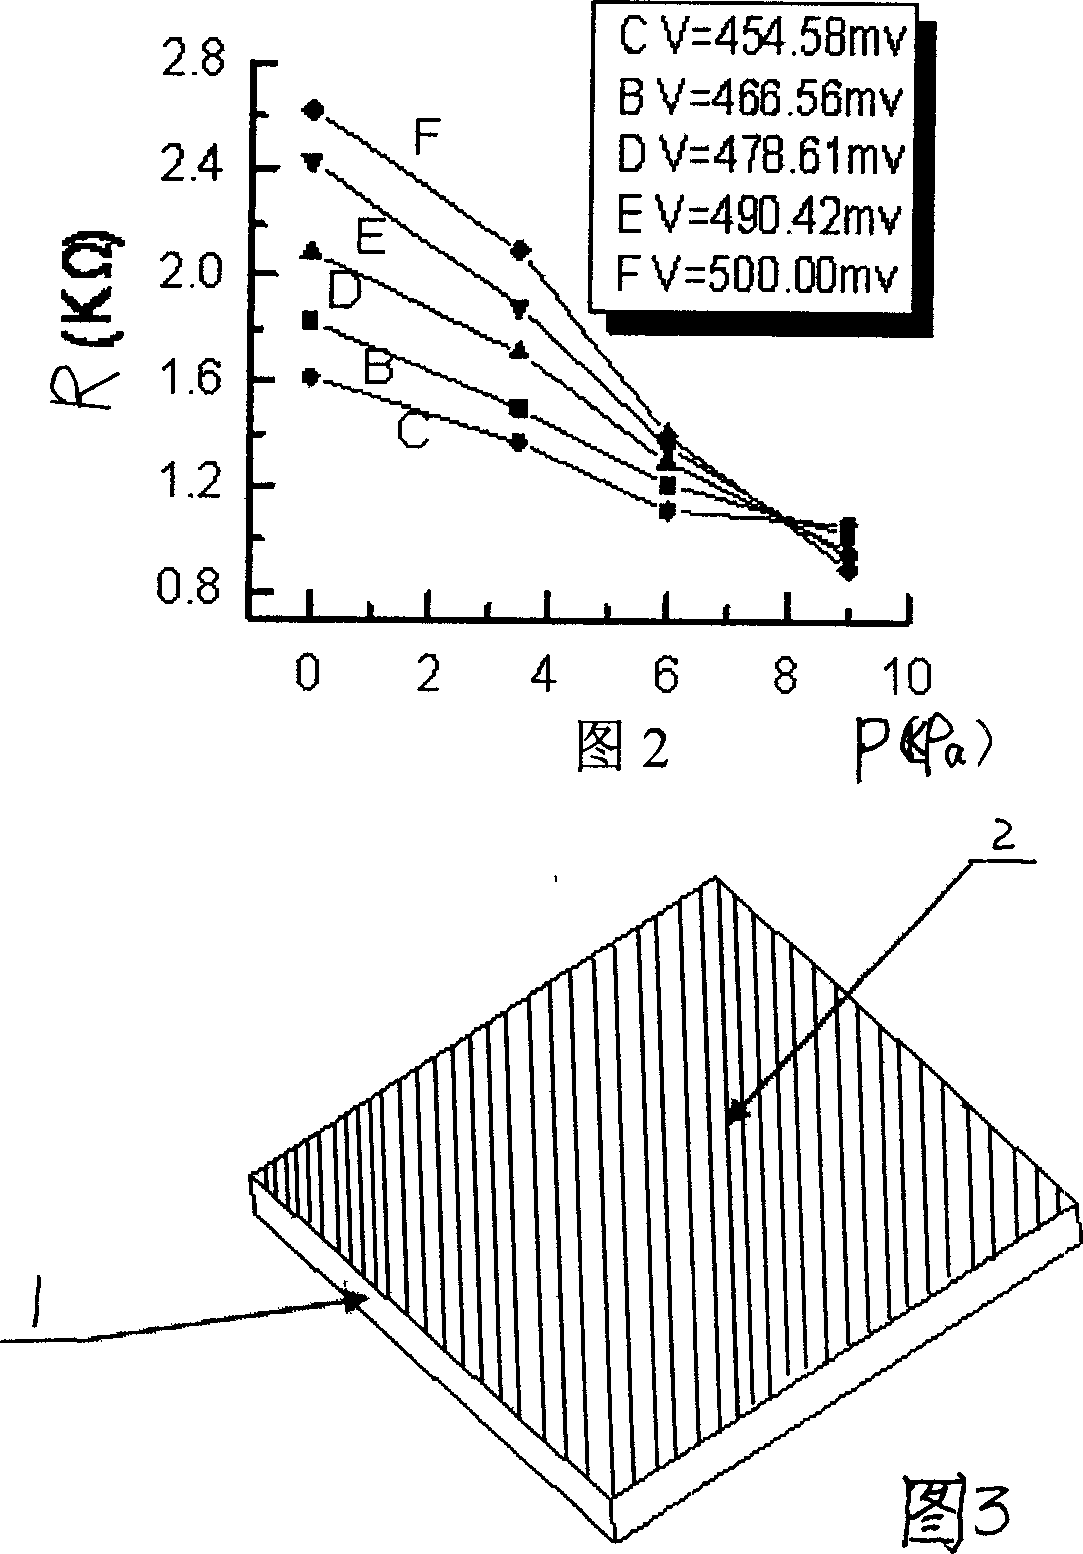 Resonance tunnel through pressure resistance type micro acceleration meter